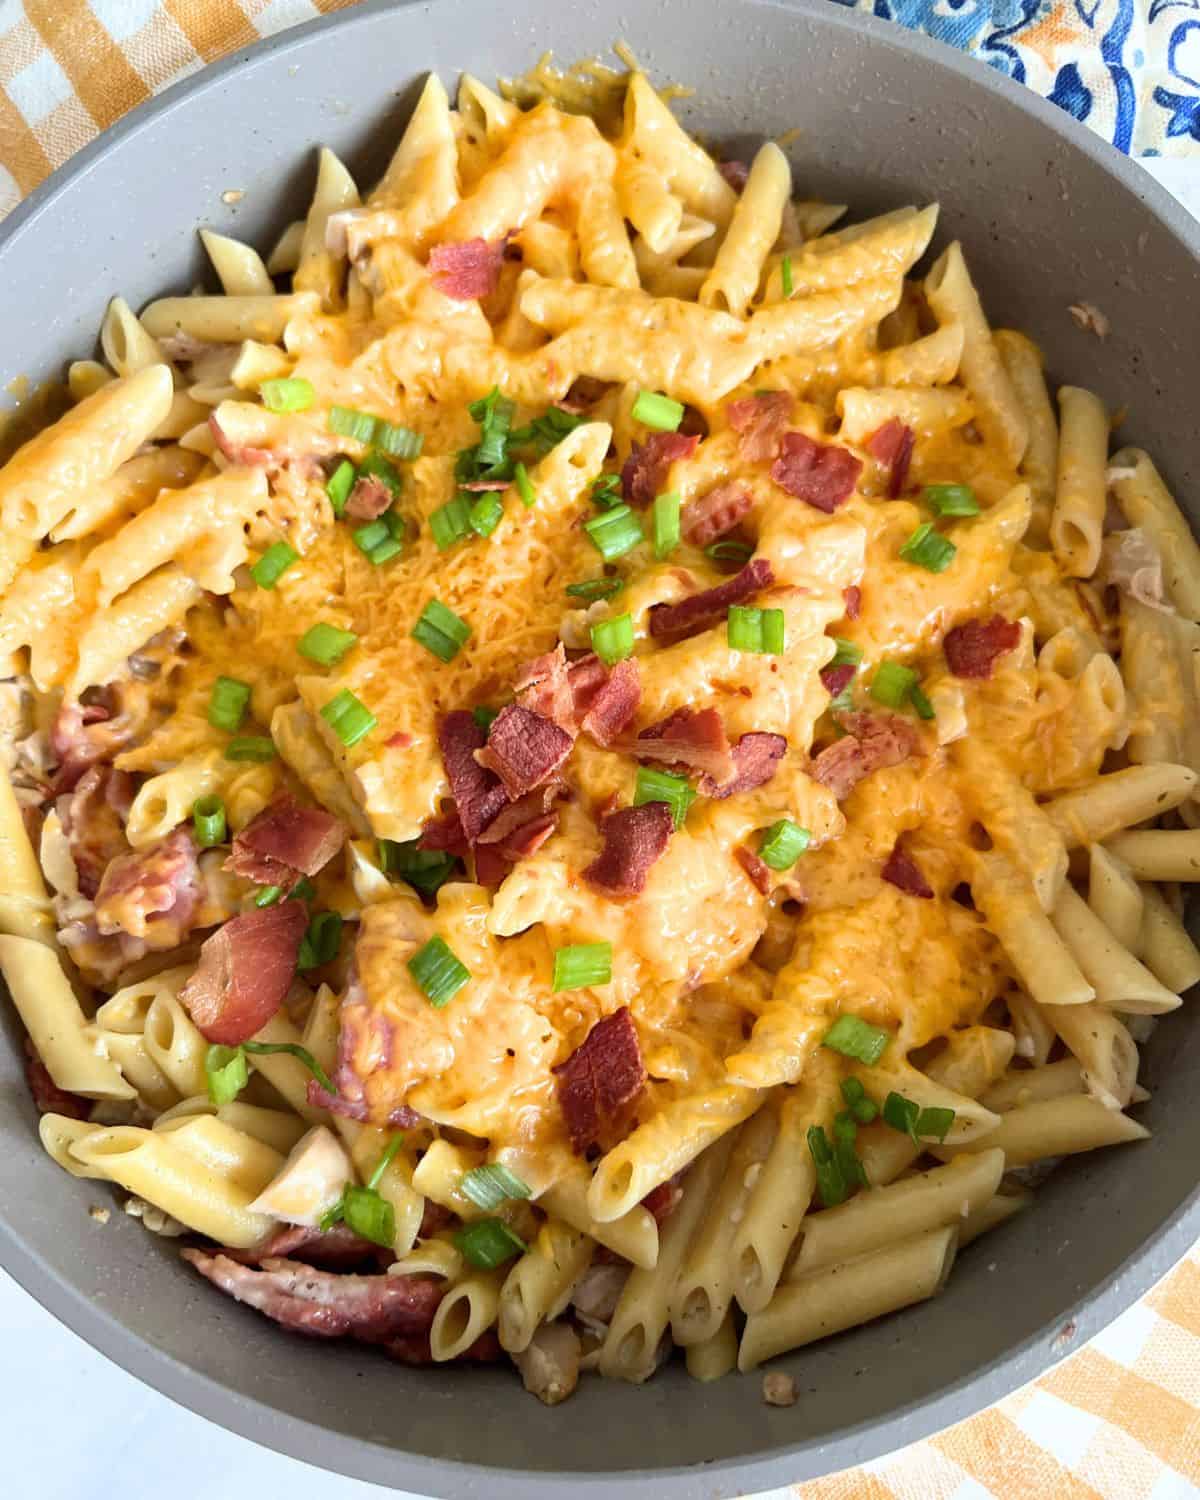 Cheddar cheese melted over pasta and topped with bacon and scallions. 